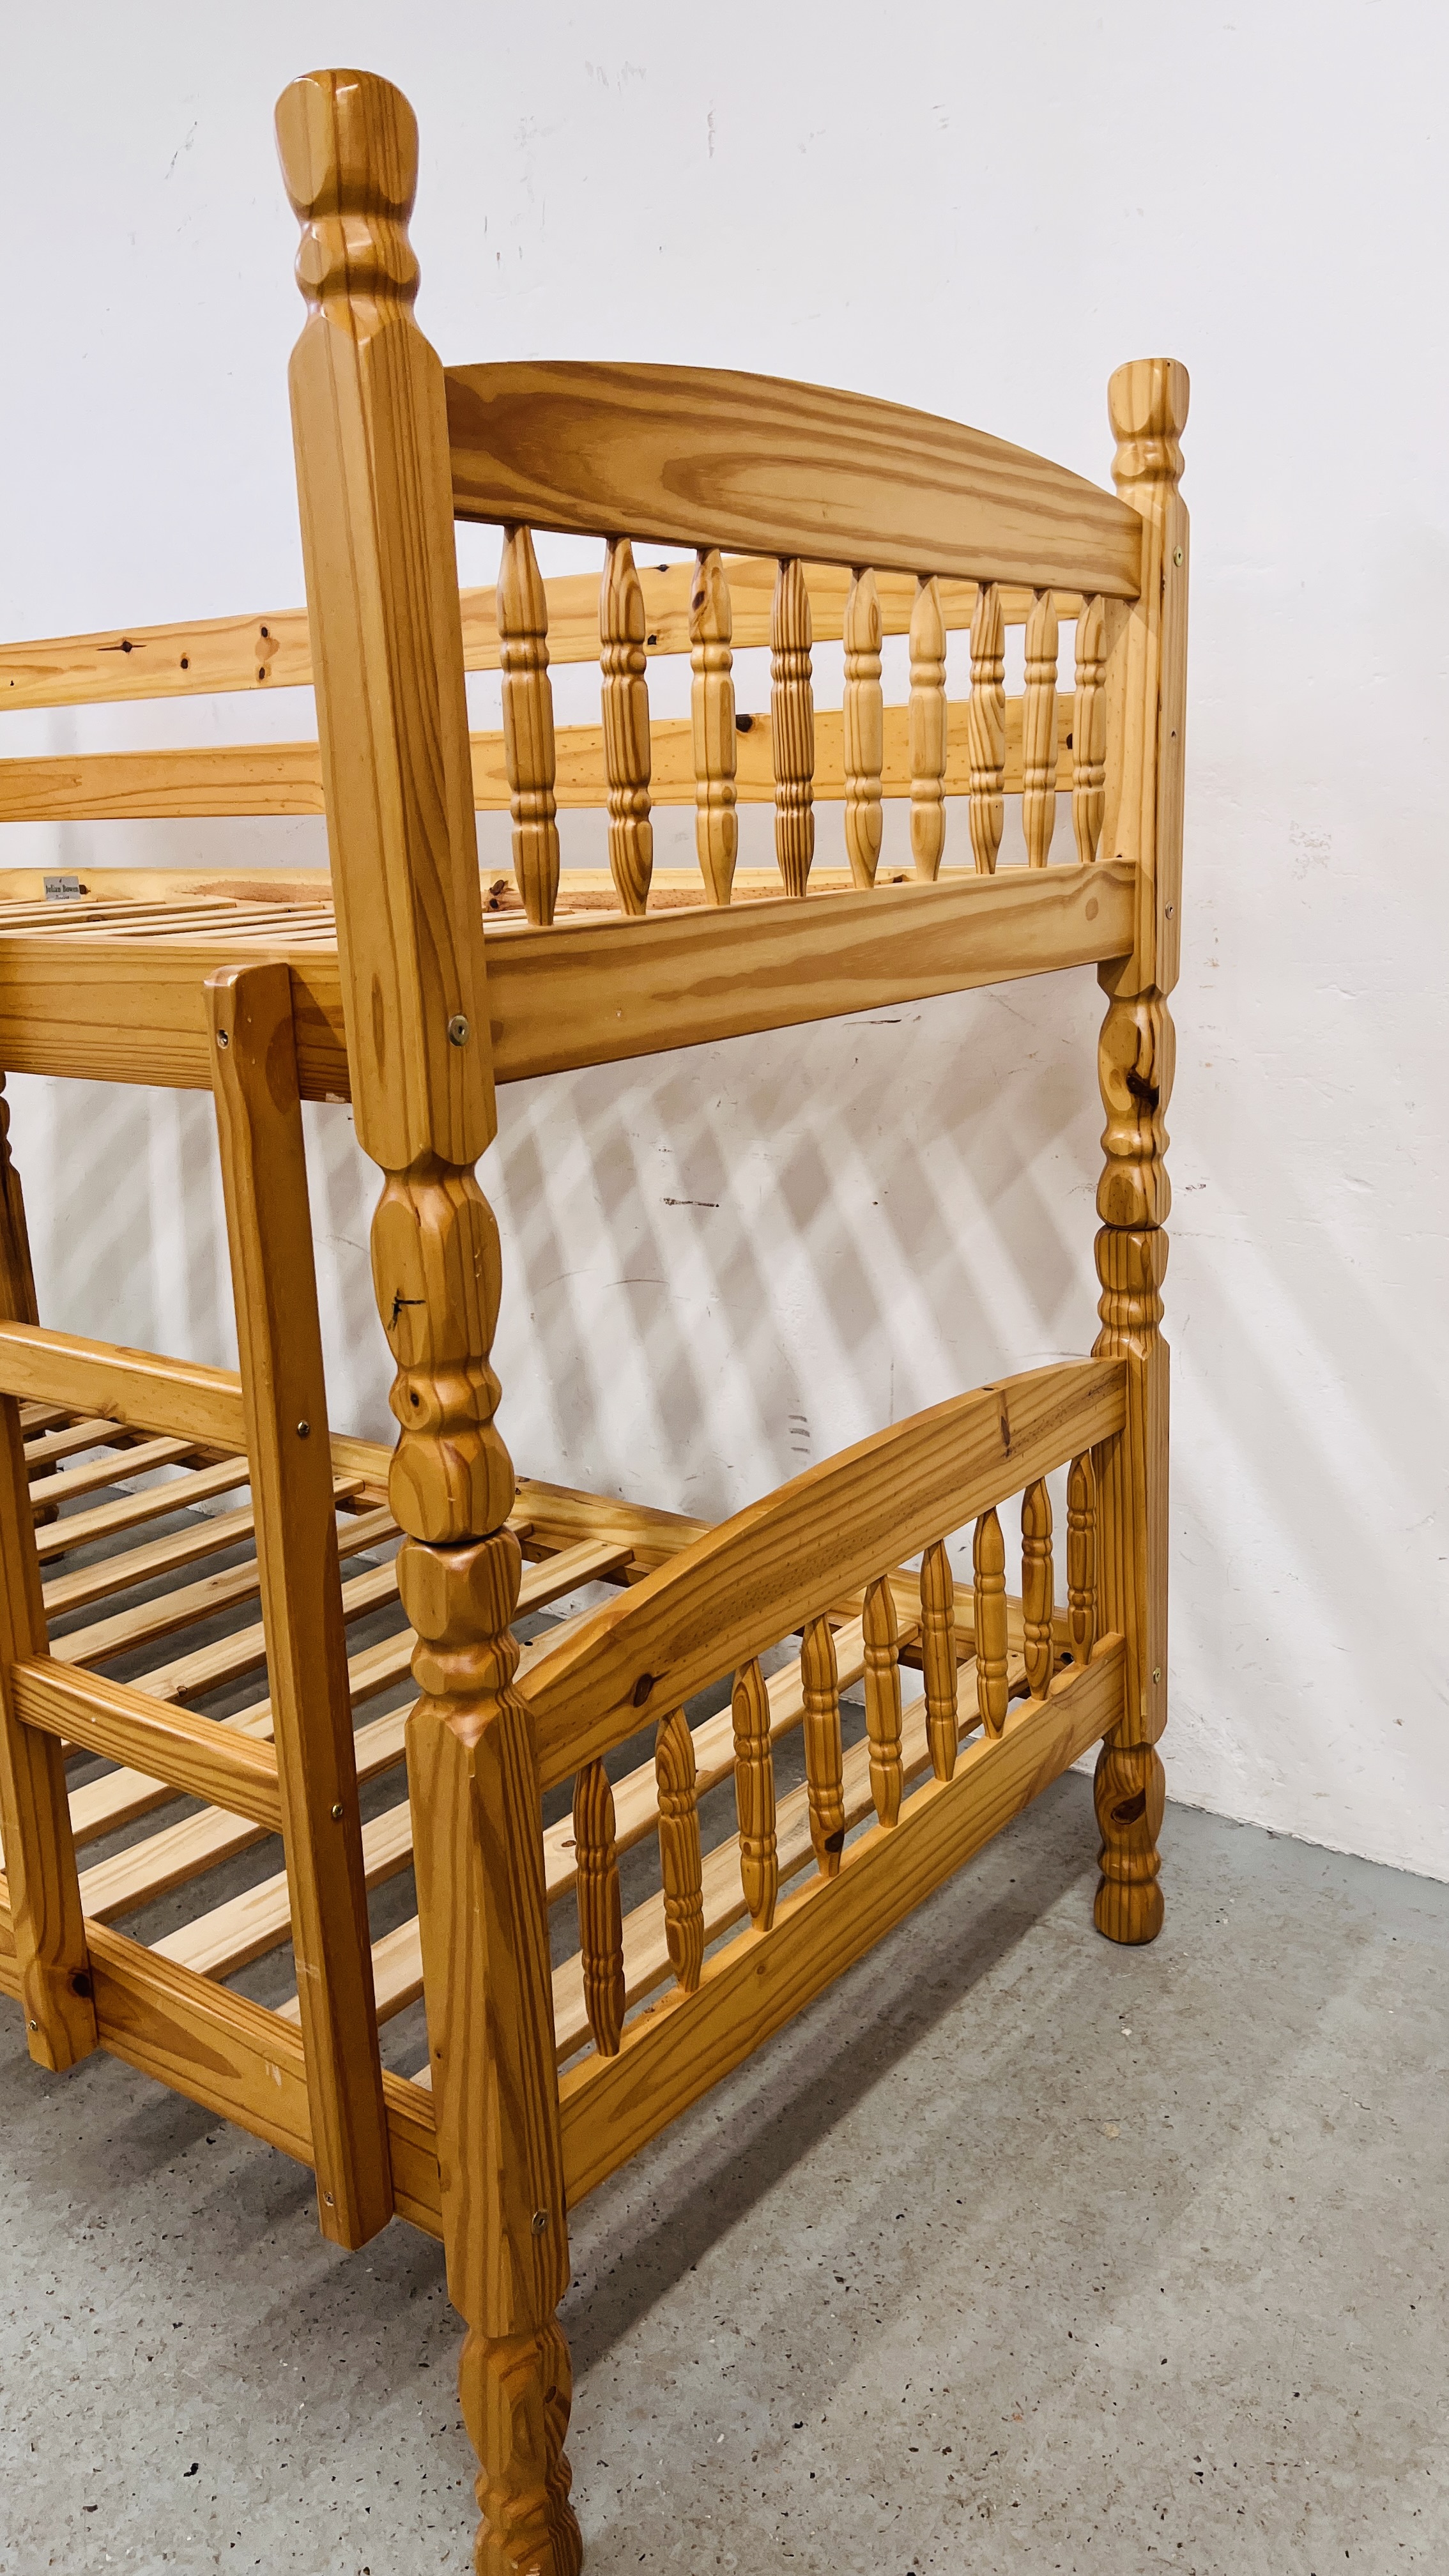 A PINE FRAME BUNK BED - Image 3 of 11